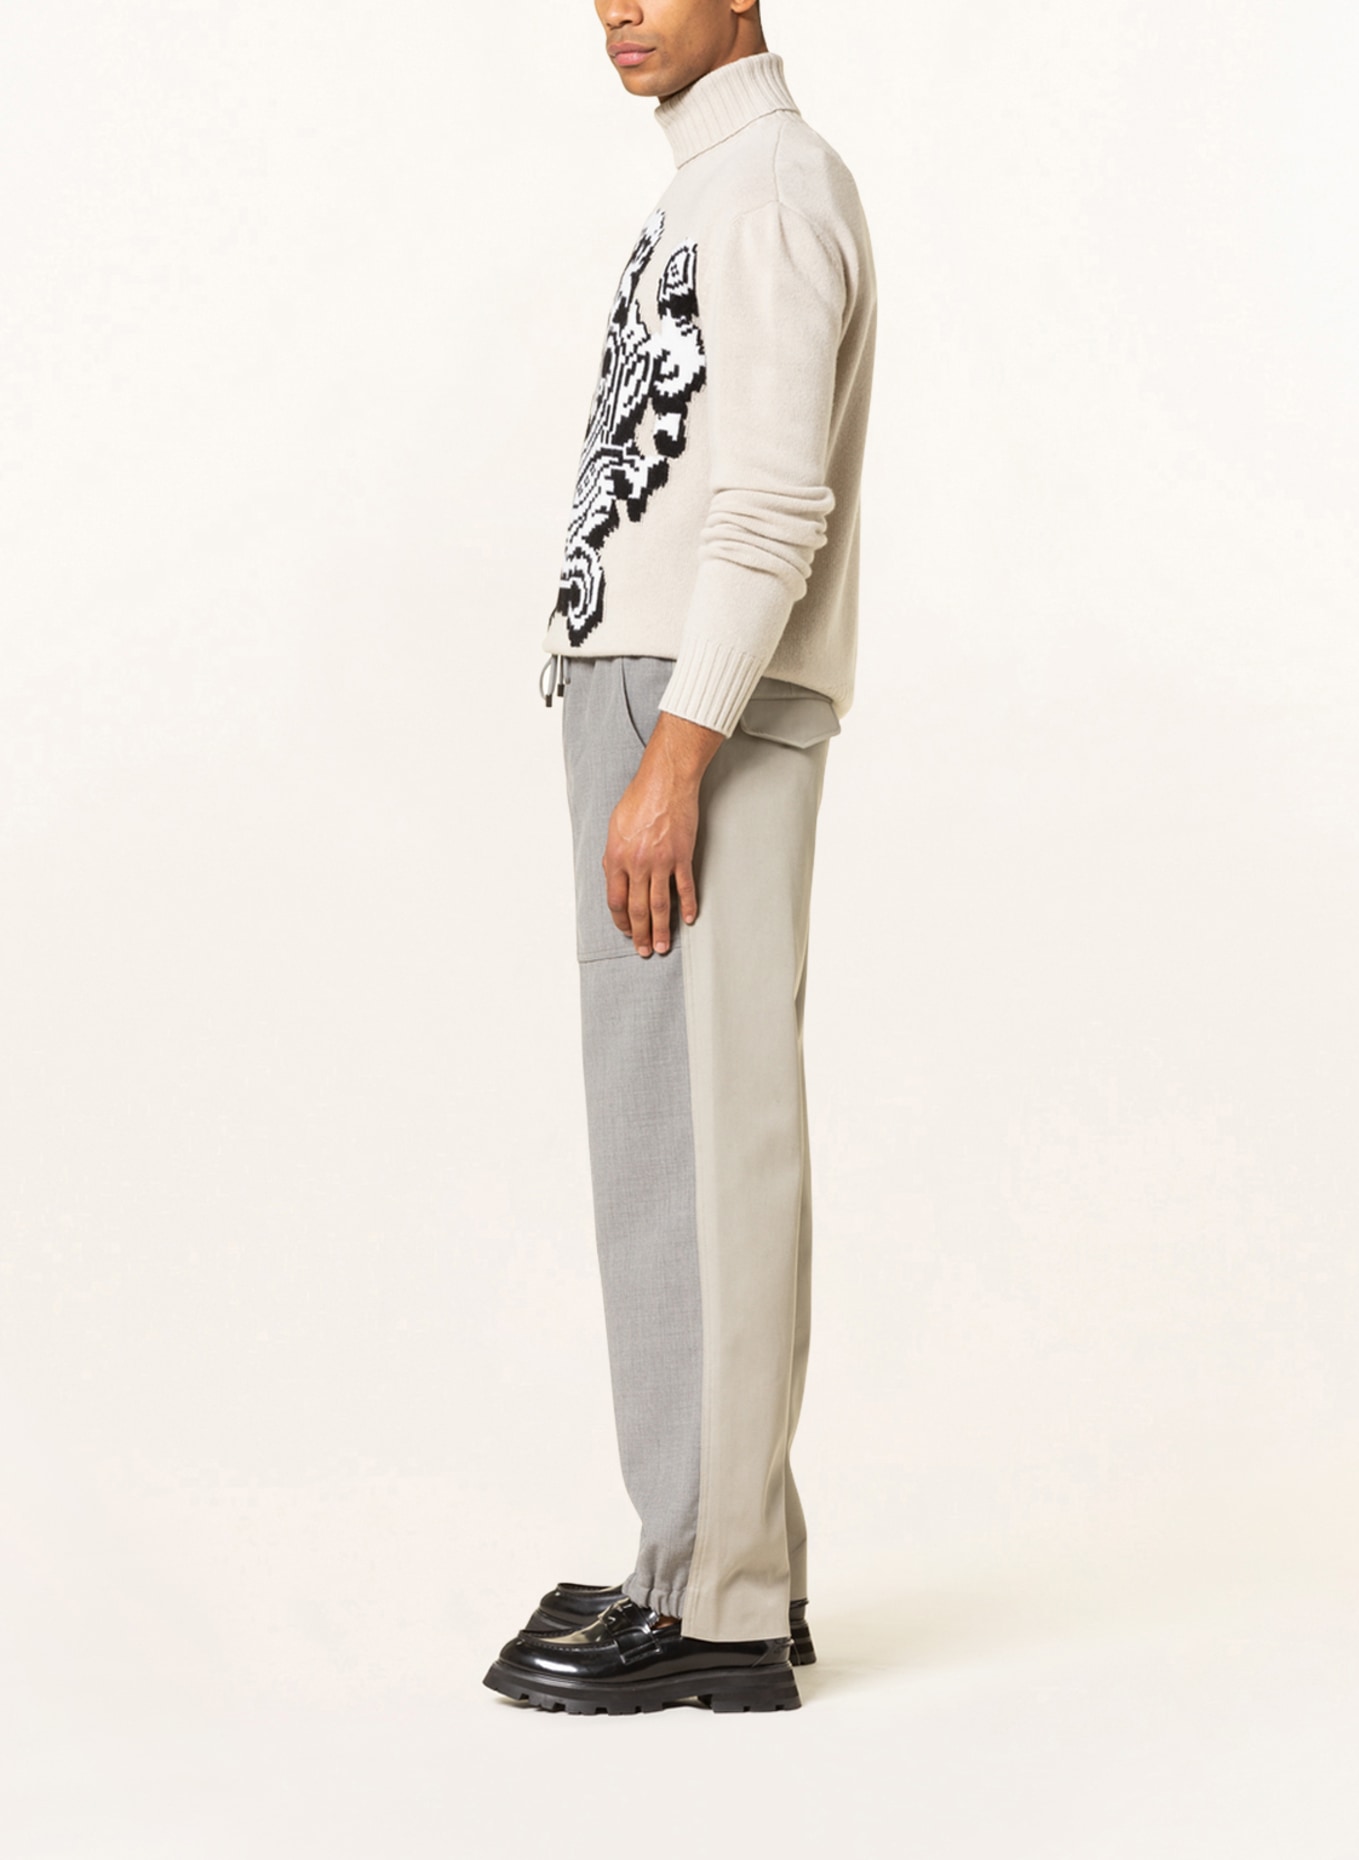 ETRO Pants in jogger style regular fit , Color: GRAY/ BEIGE (Image 4)